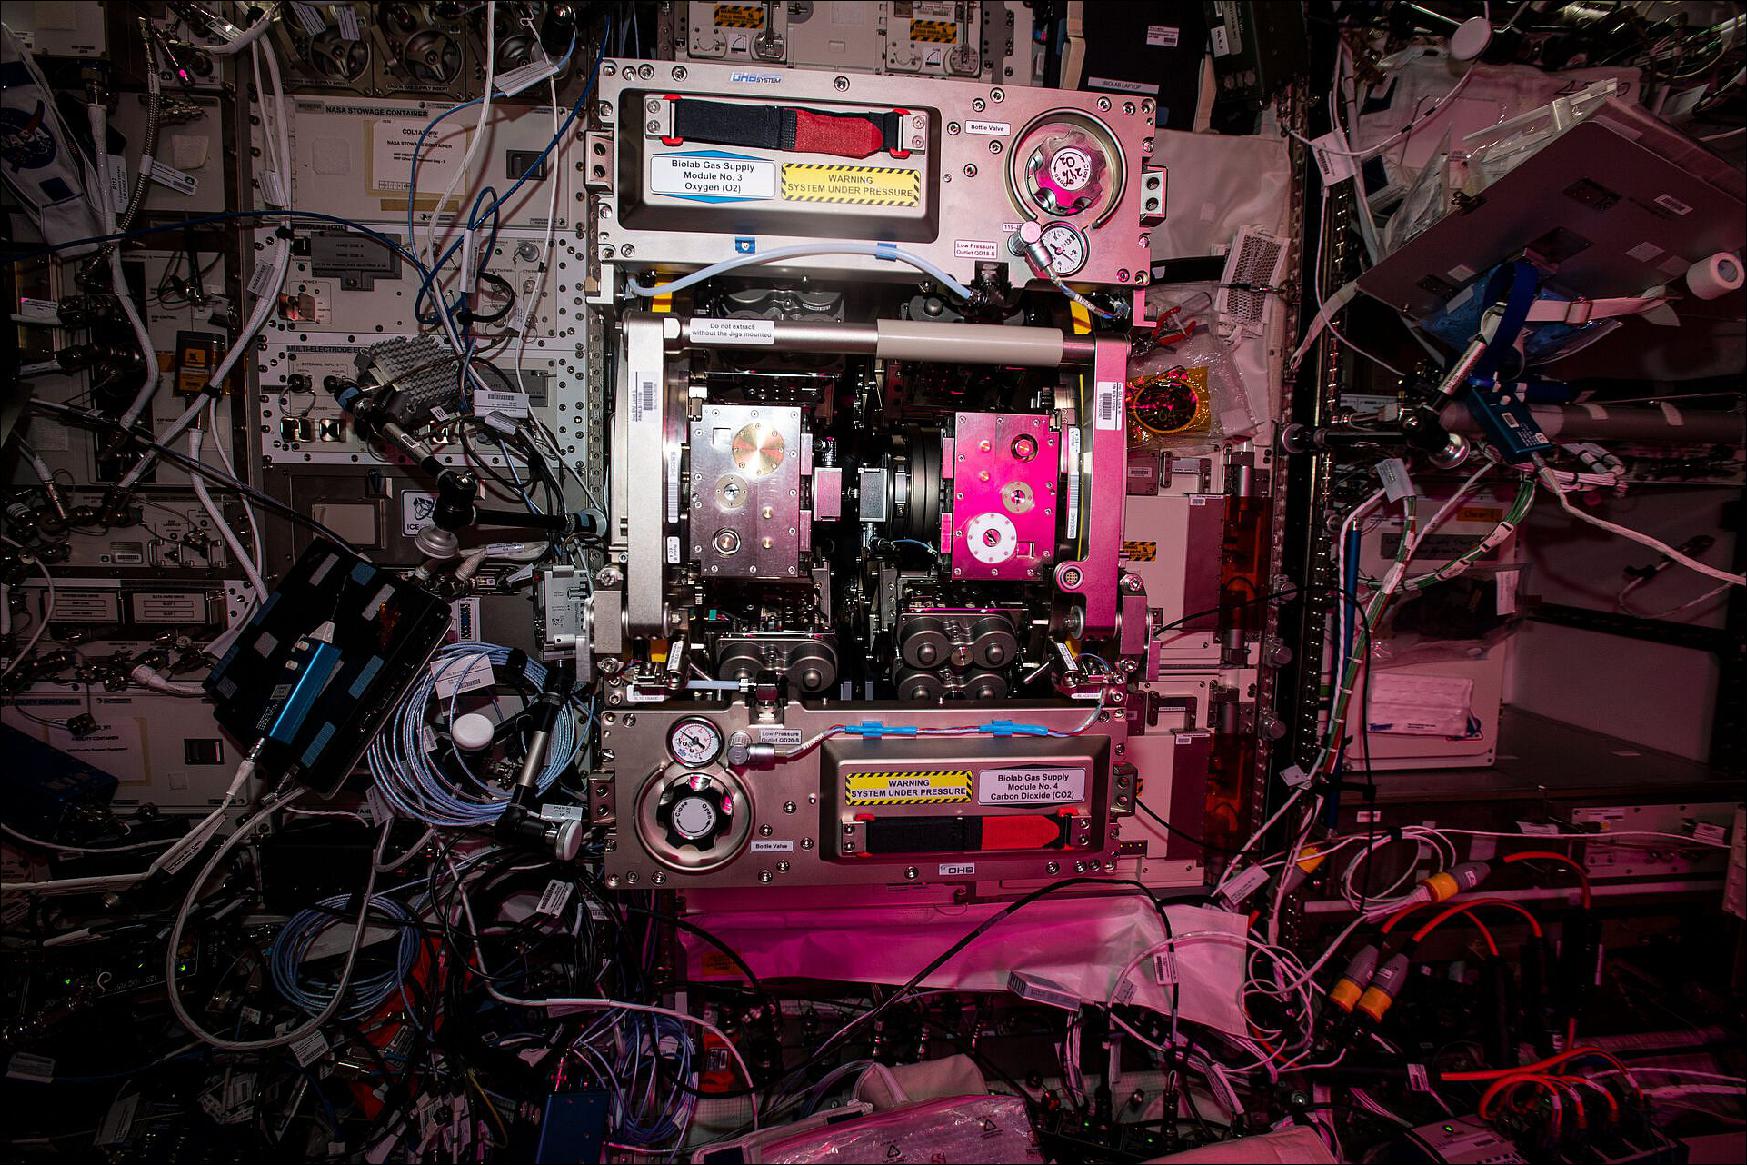 Figure 129: This image, taken in ESA's Columbus laboratory on the International Space Station, is a snapshot of the many opportunities in space research and exploration. In the center is the Biolab facility, a fridge-sized unit that hosts biological experiments on micro-organisms, cells, tissue cultures, small plants and small invertebrates. Performing life science experiments in space identifies the role that weightlessness plays at all levels of an organism, from the effects on a single cell up to a complex organism including humans (image credit: ESA/NASA)